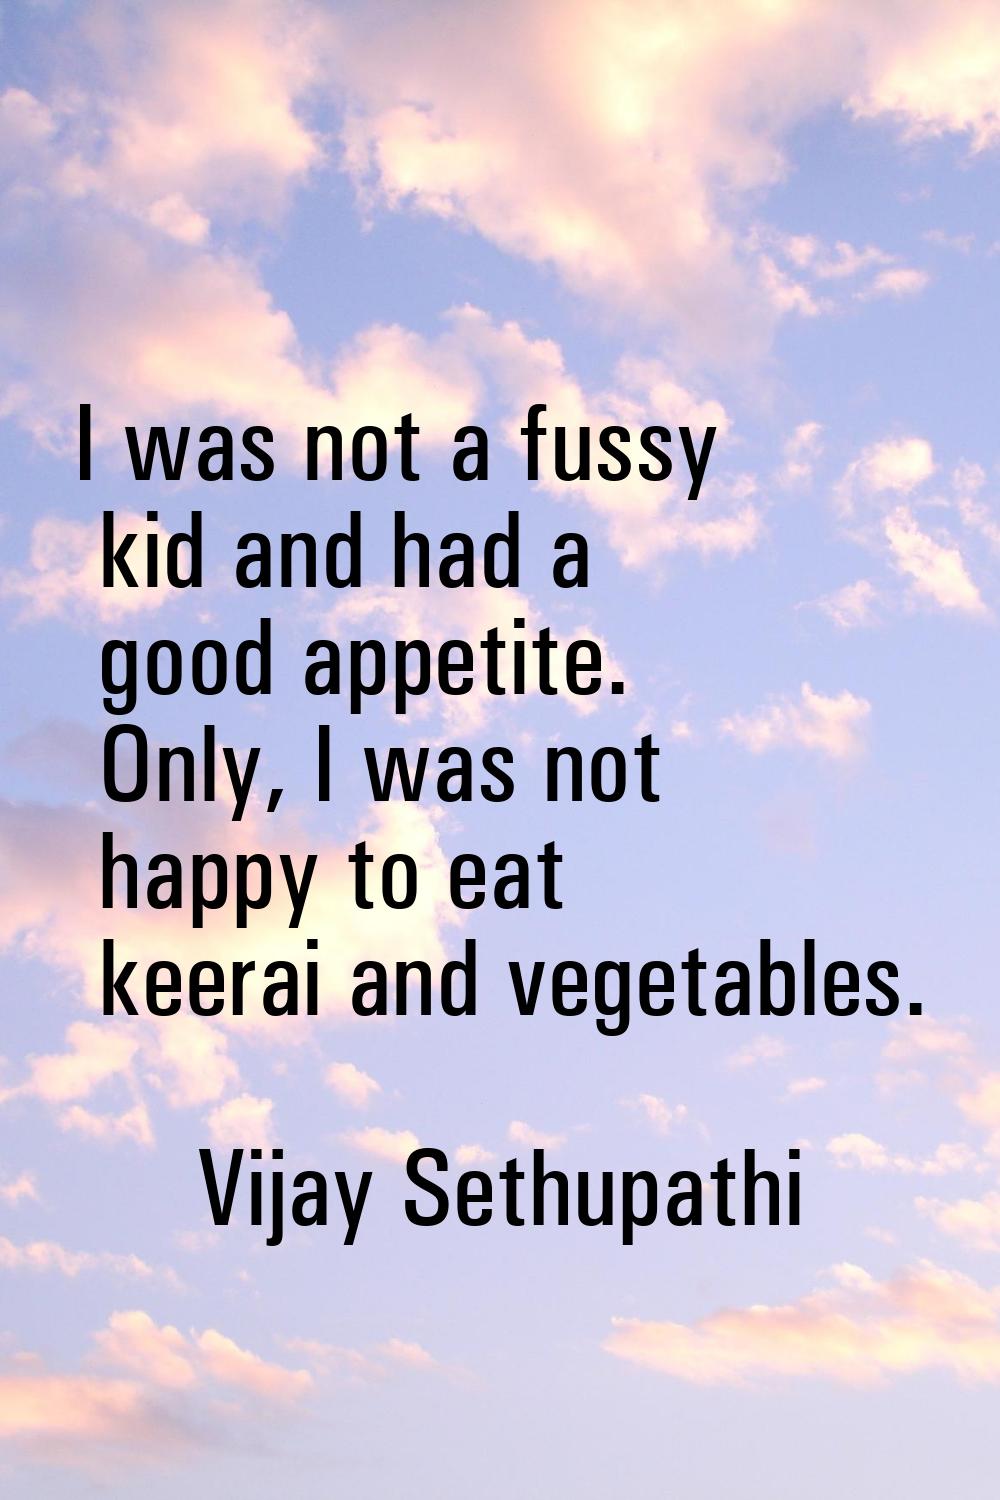 I was not a fussy kid and had a good appetite. Only, I was not happy to eat keerai and vegetables.